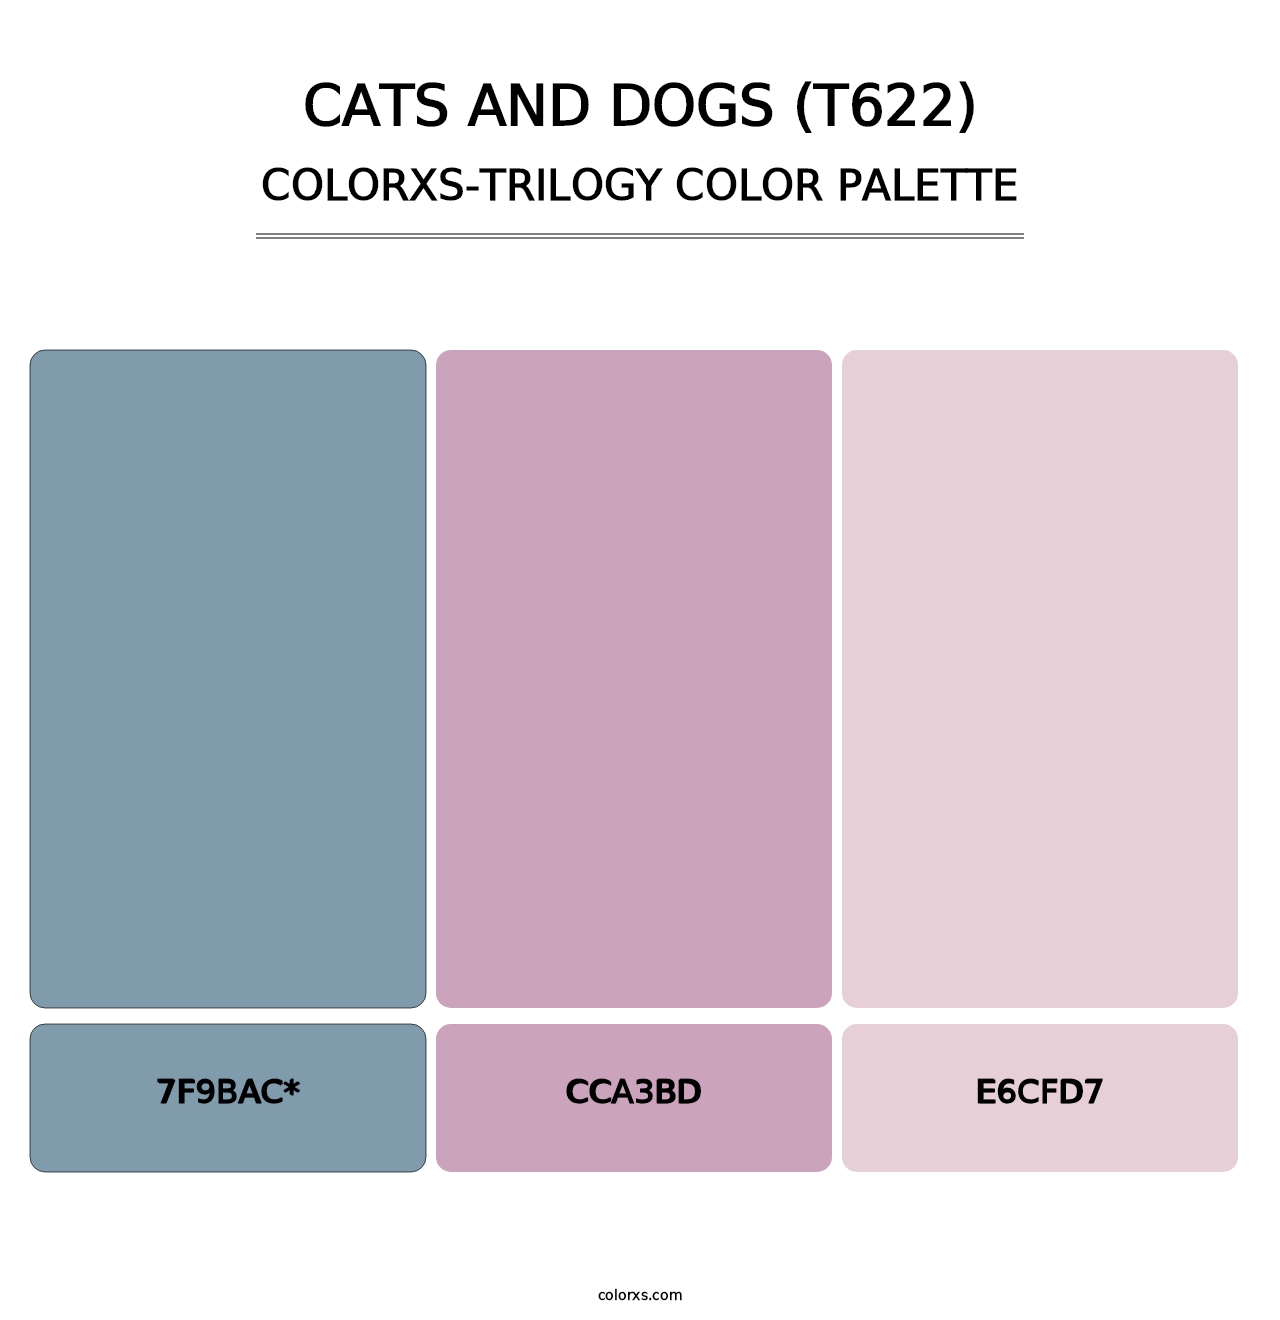 Cats and Dogs (T622) - Colorxs Trilogy Palette